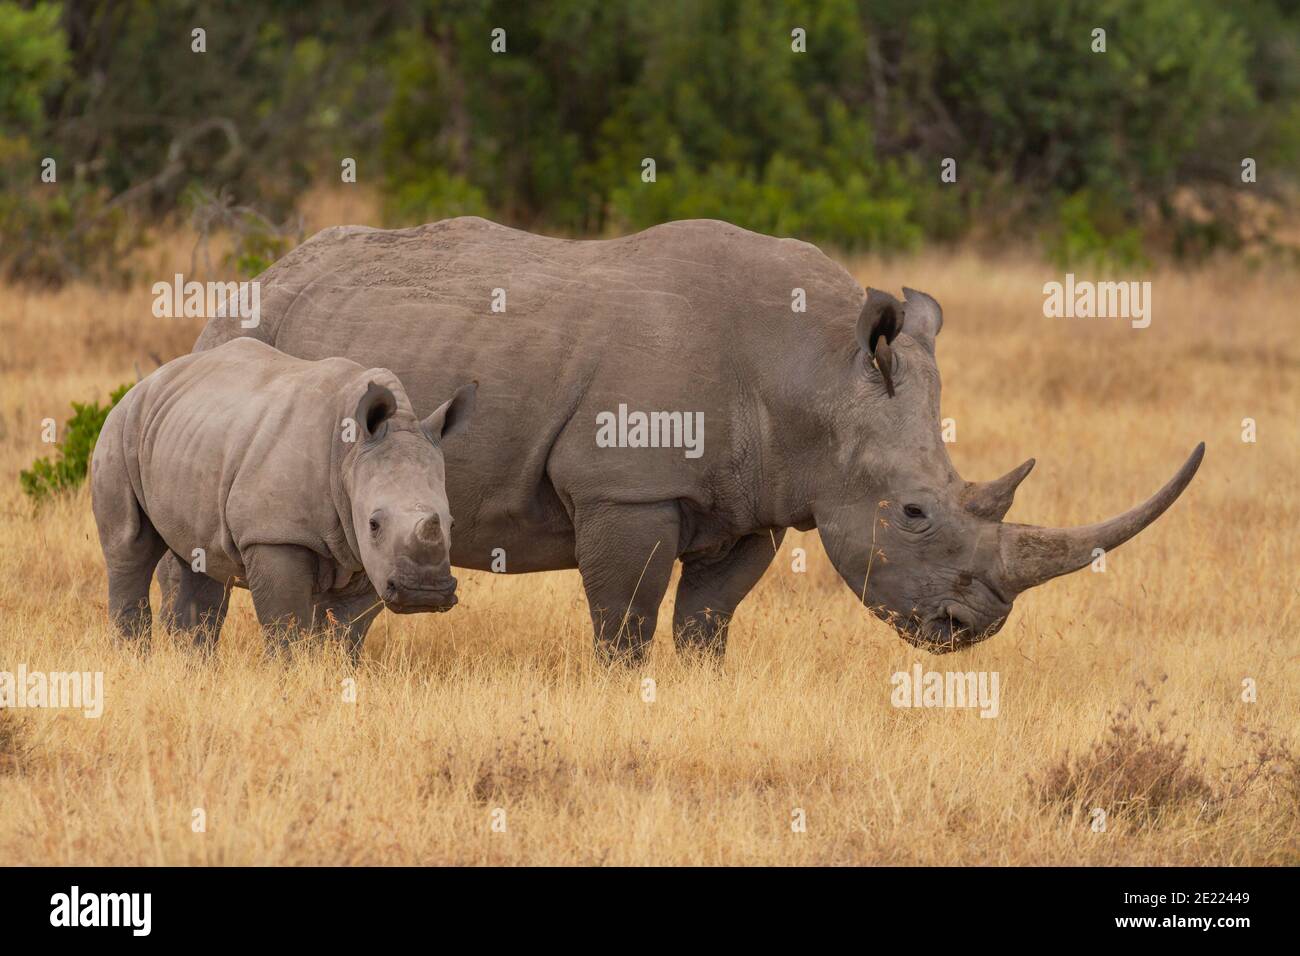 Southern white rhinoceros cow and calf (Ceratotherium simum) in Ol Pejeta Conservancy, Kenya, Africa. Near threatened species, cute baby animal Stock Photo